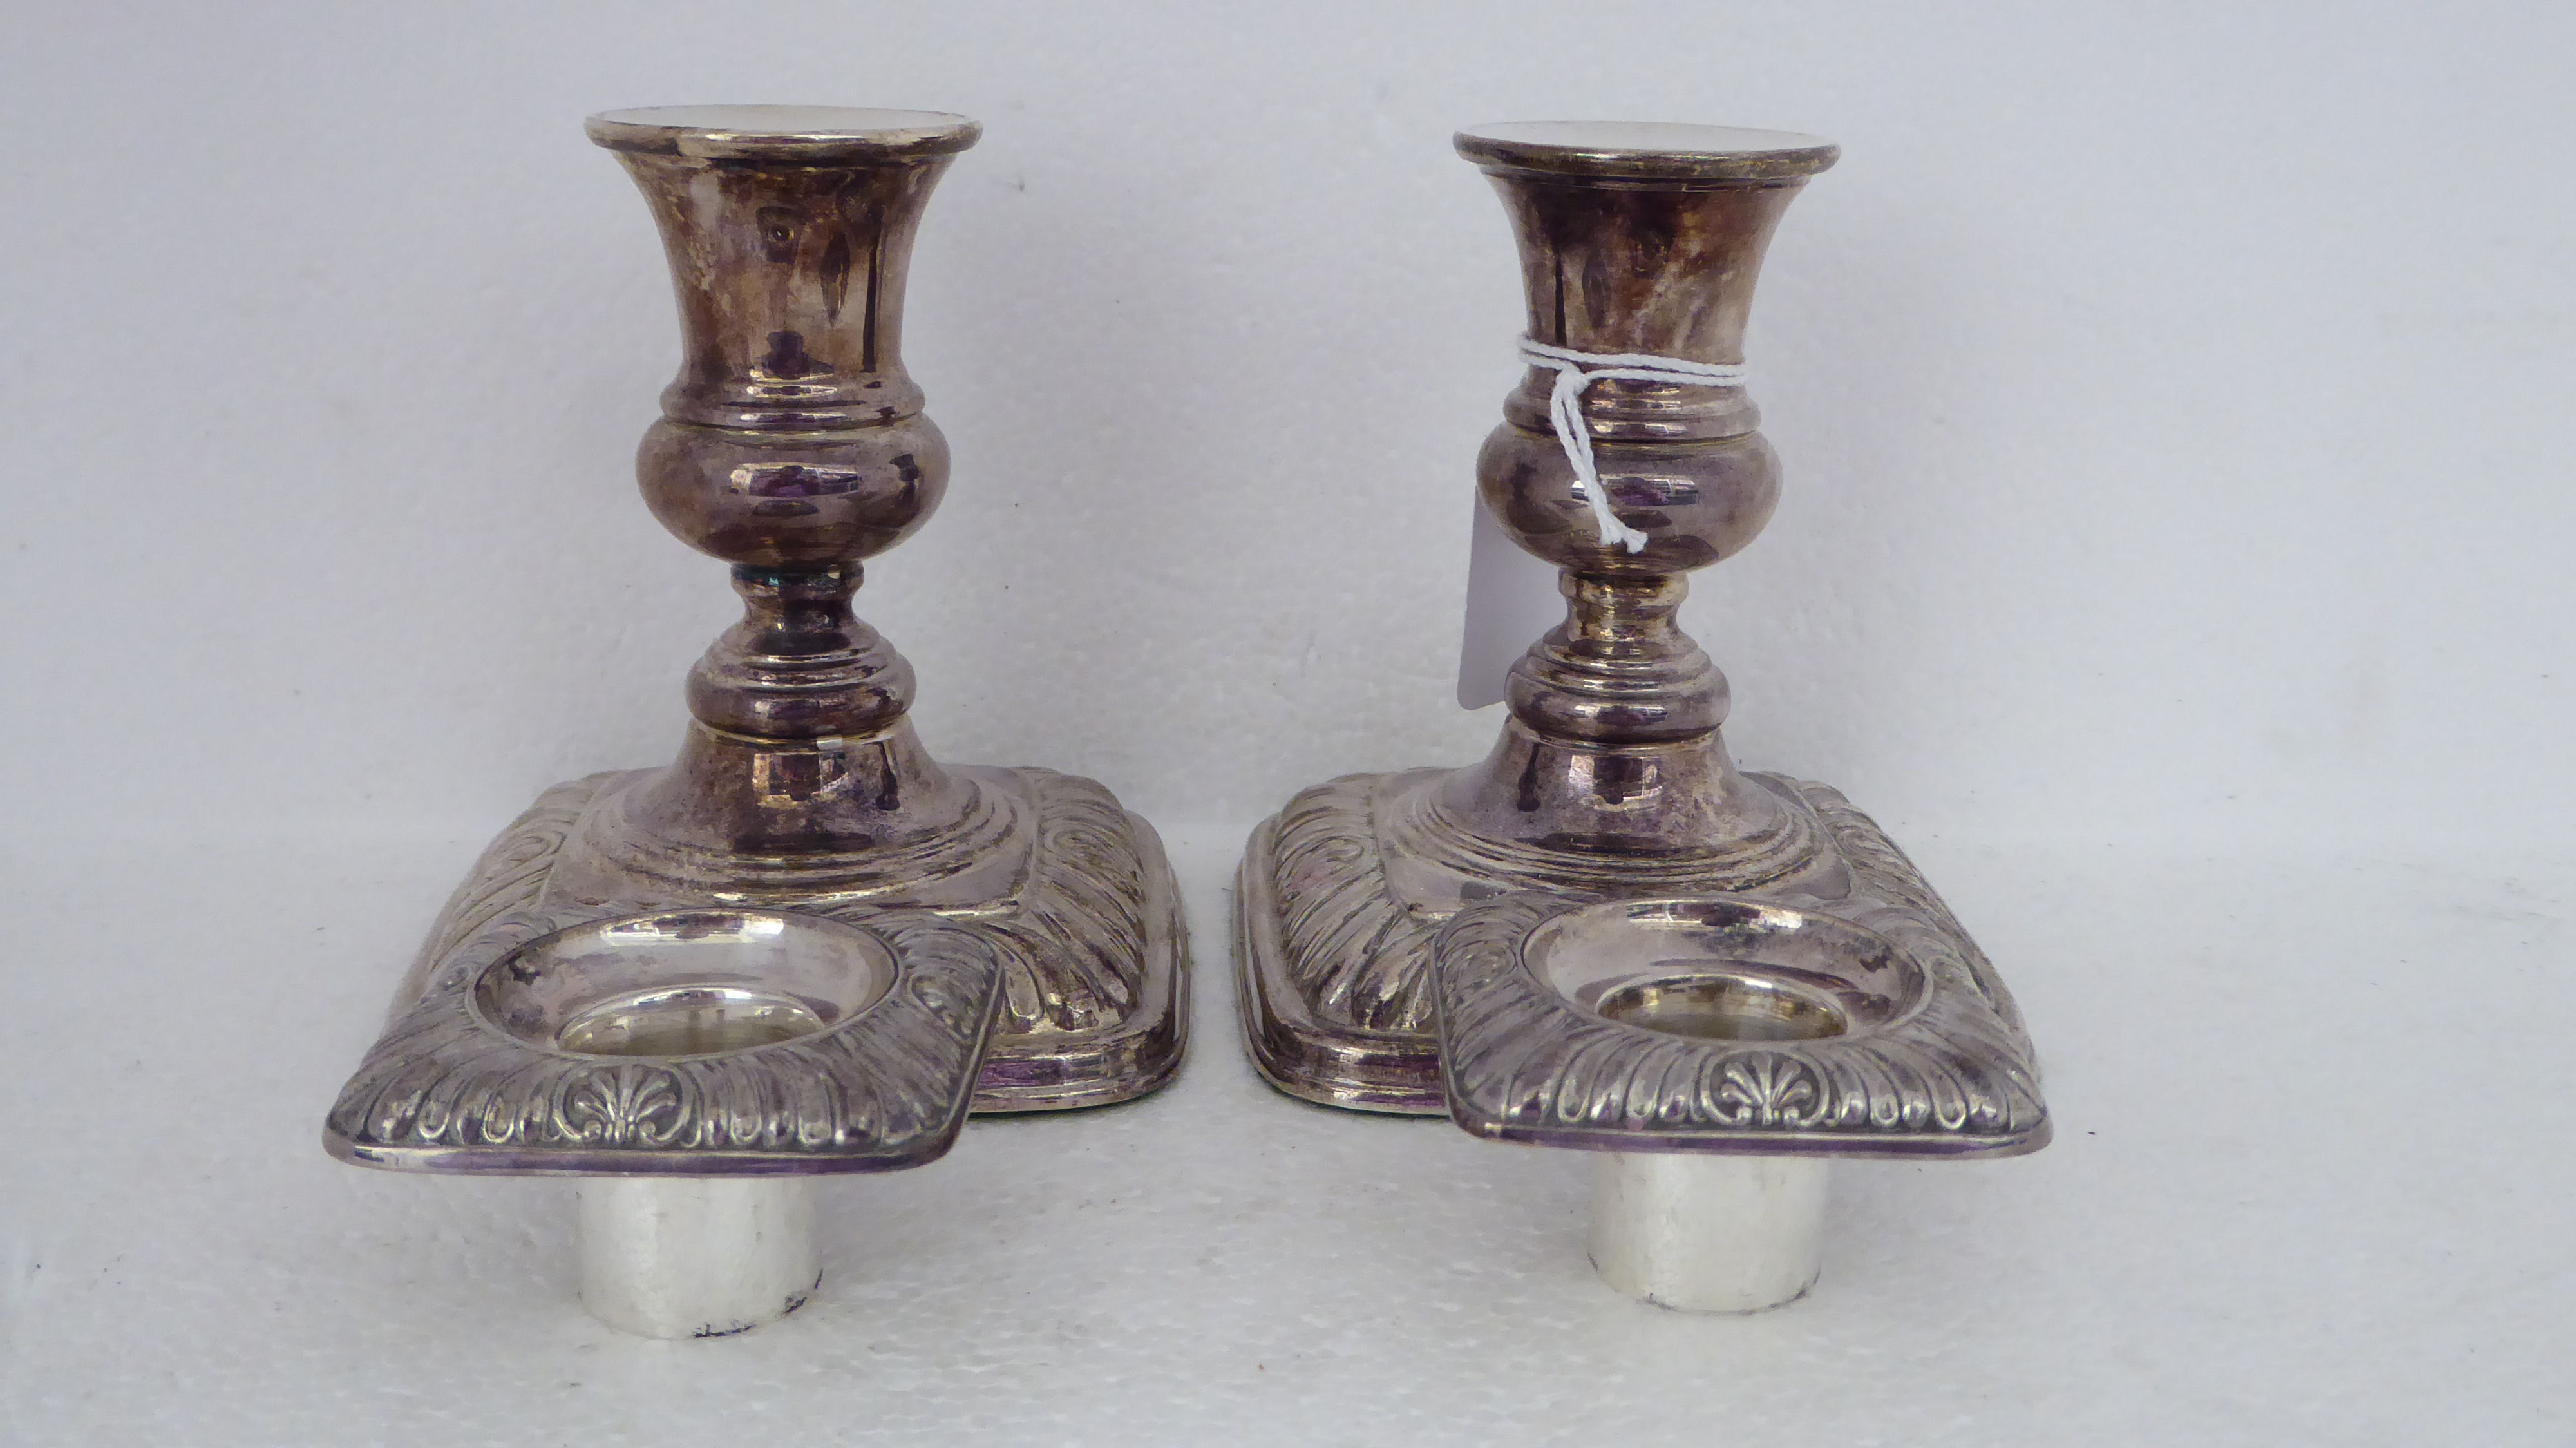 A pair of loaded silver candlesticks with embossed decoration  Birmingham 1987  4.5"h - Image 5 of 6